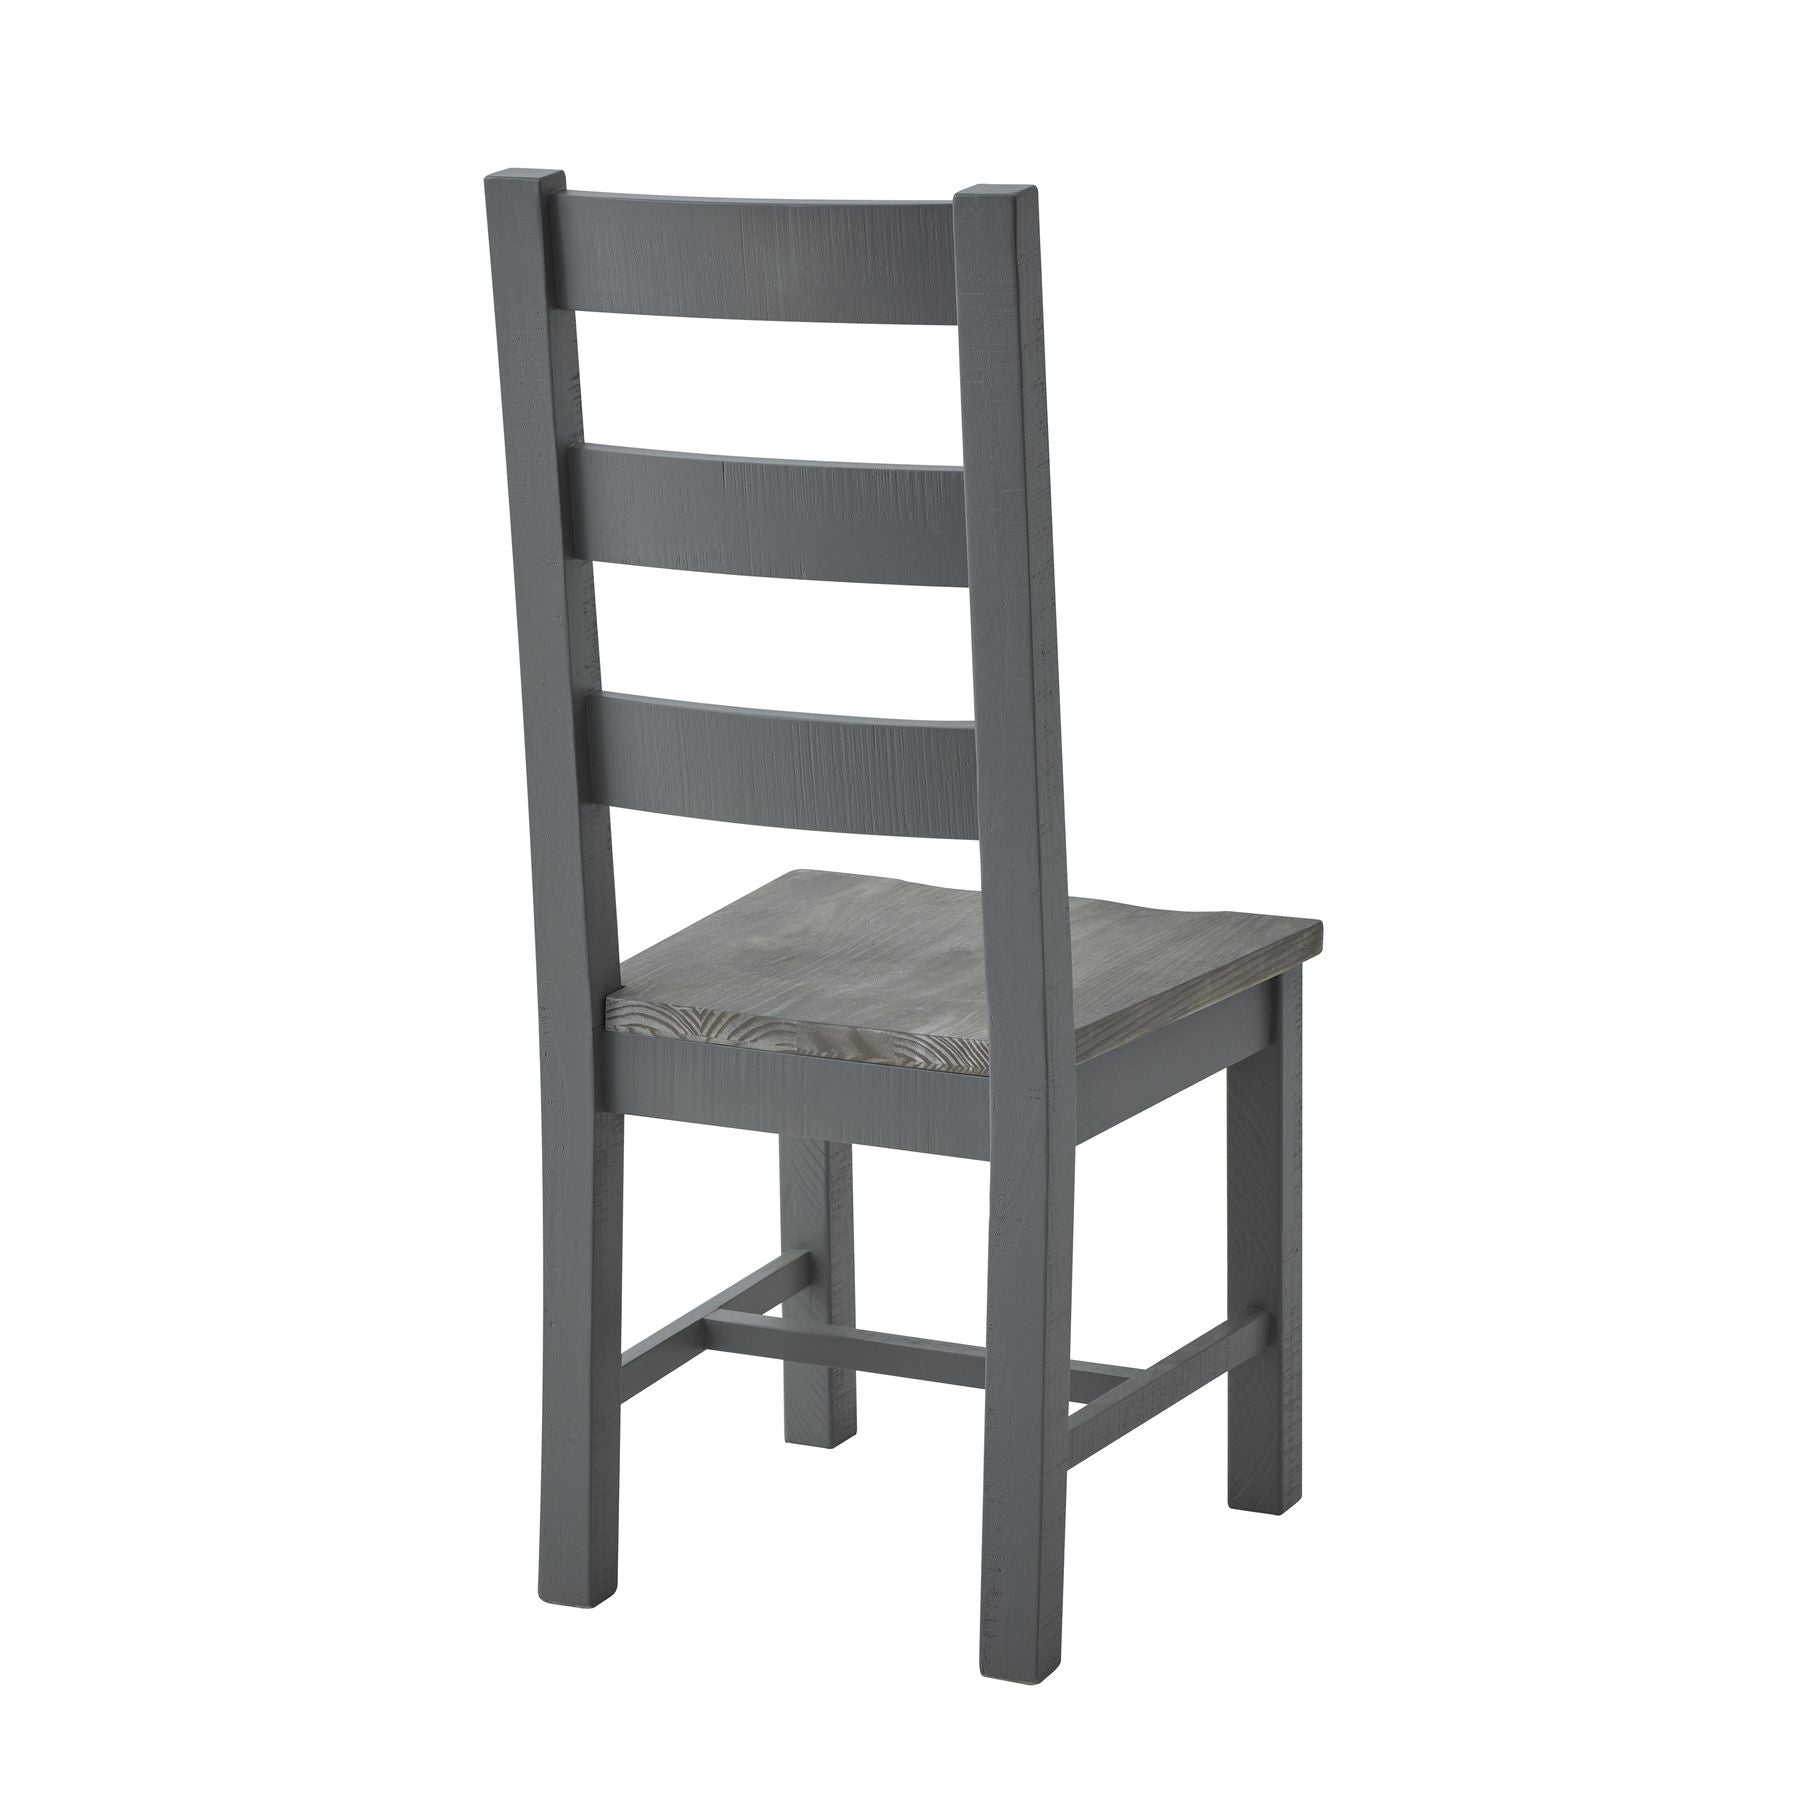 The Oxley Collection Dining Chair